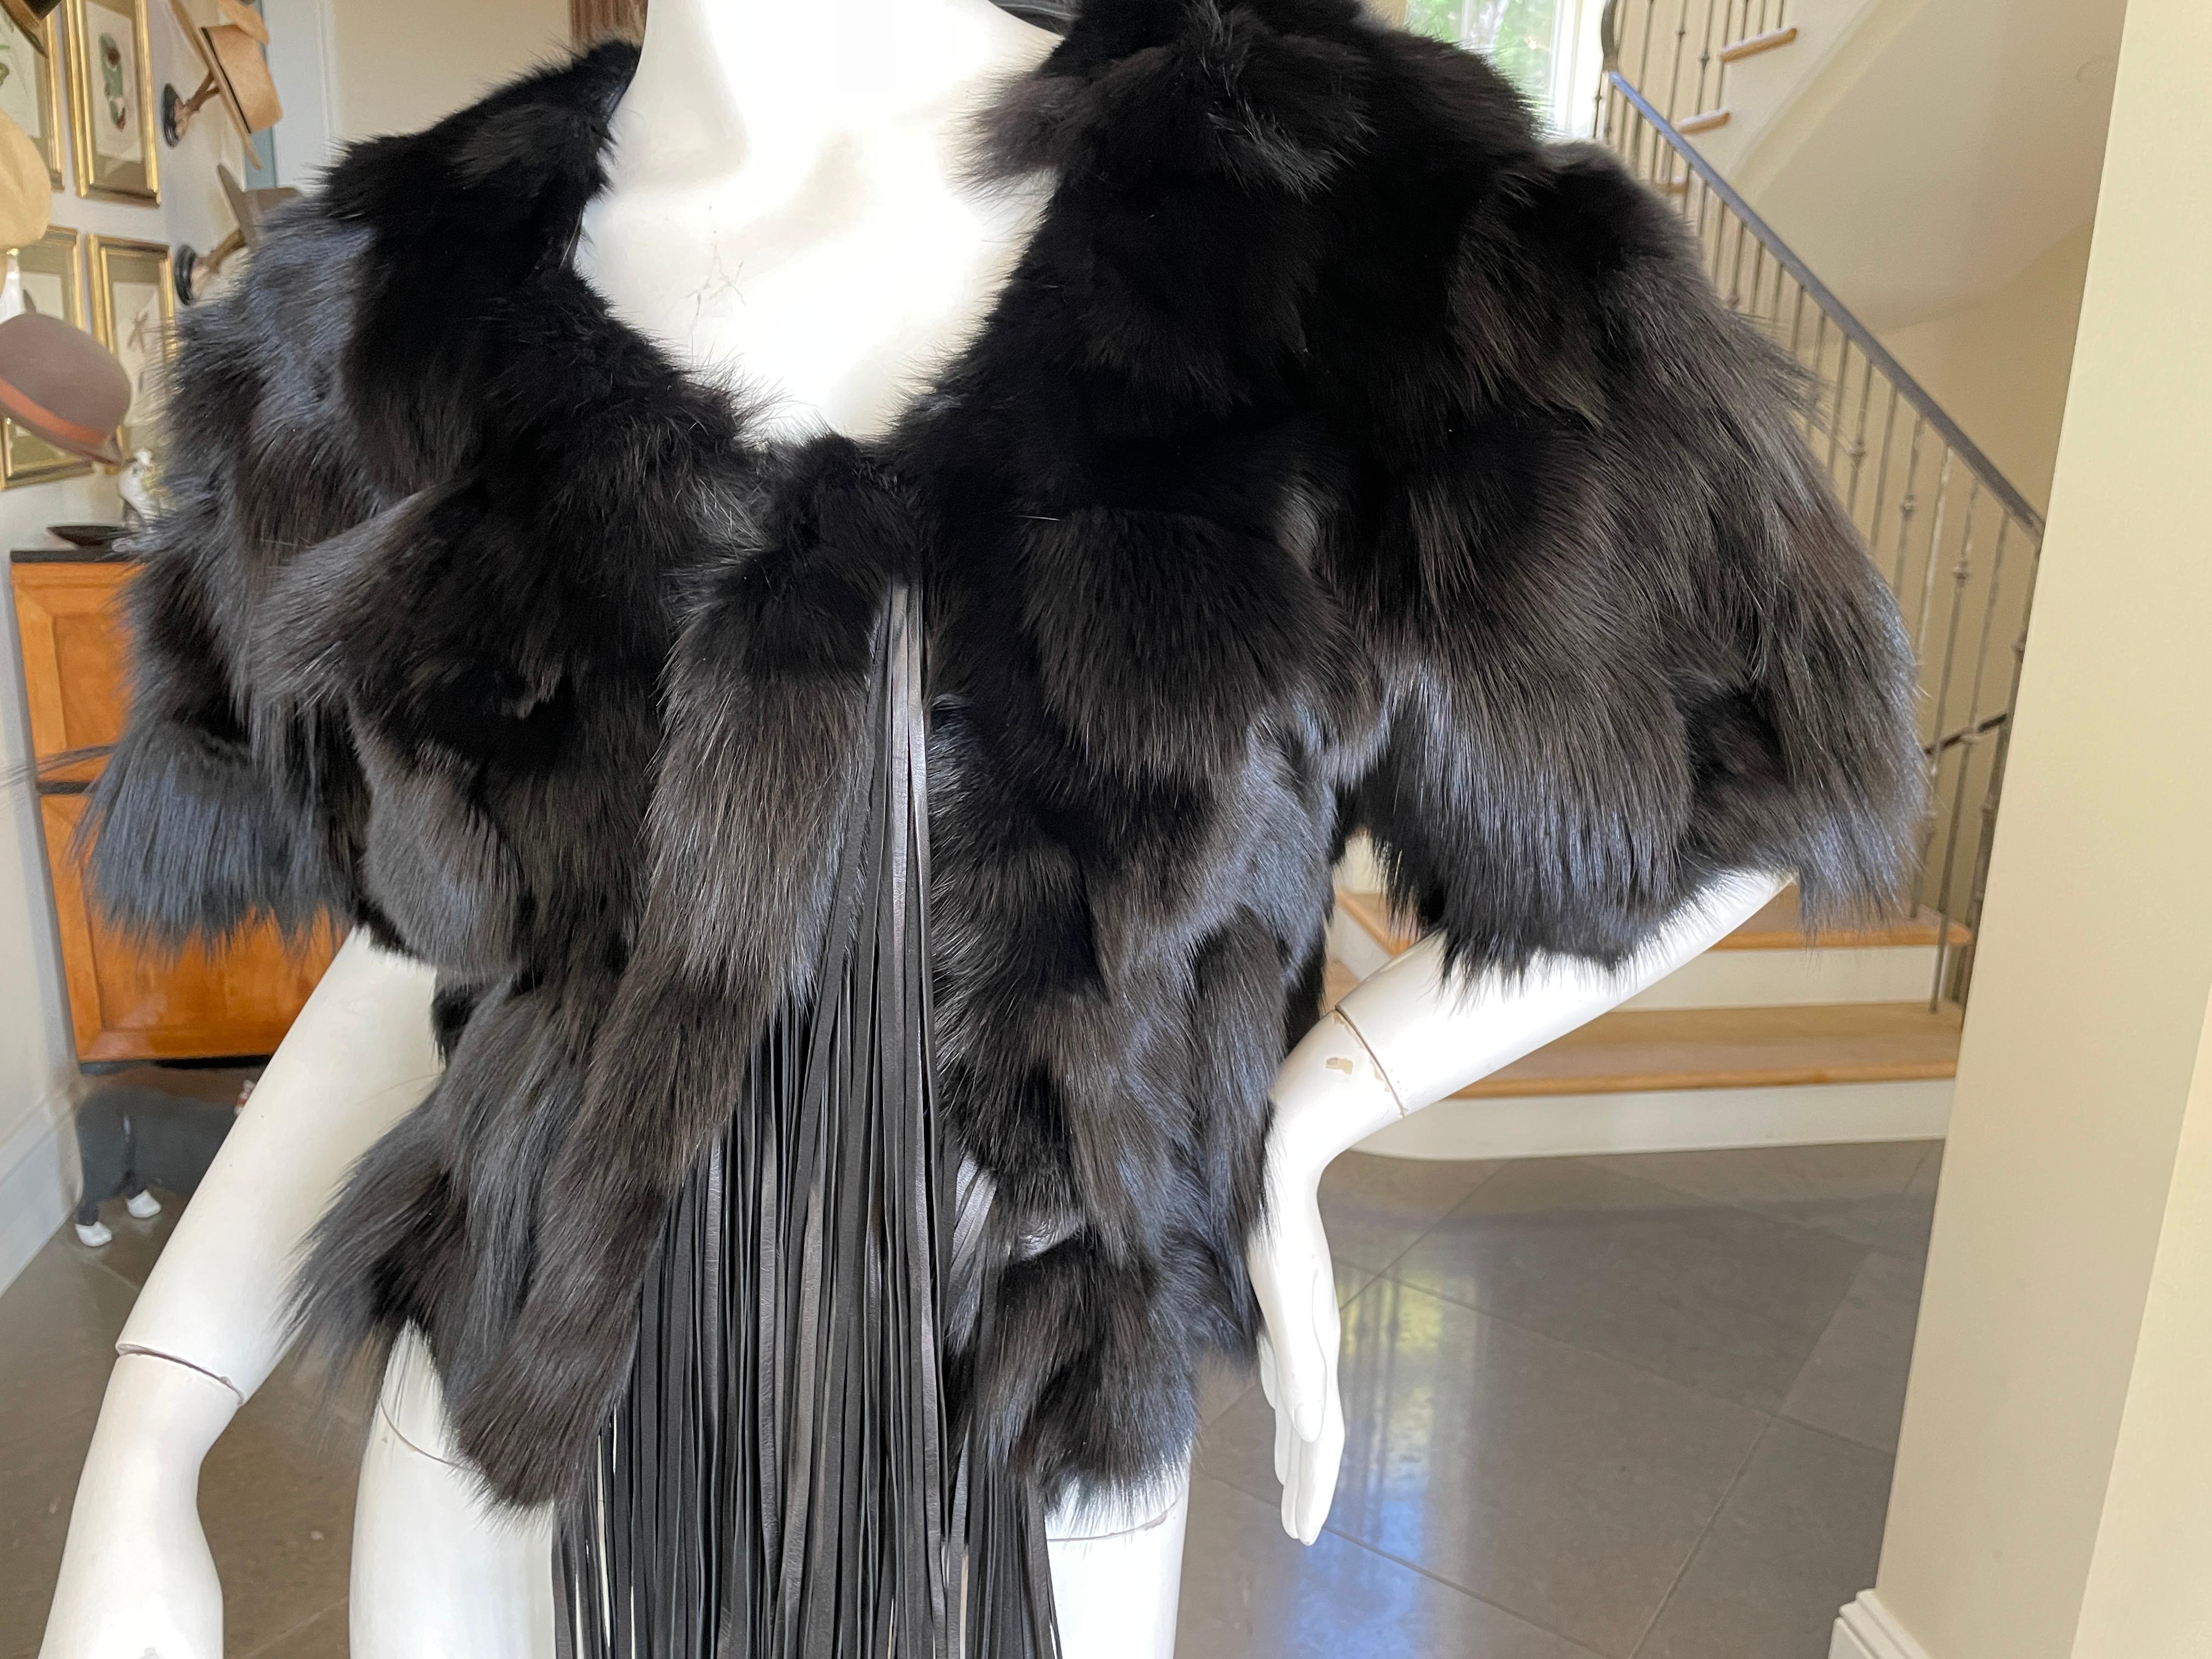 Roberto Cavalli Vintage Black Fox Fur Bolero Jacket with Leather Fringe
Please use the zoom feature to see all the great details.
Size 42
Bust 38